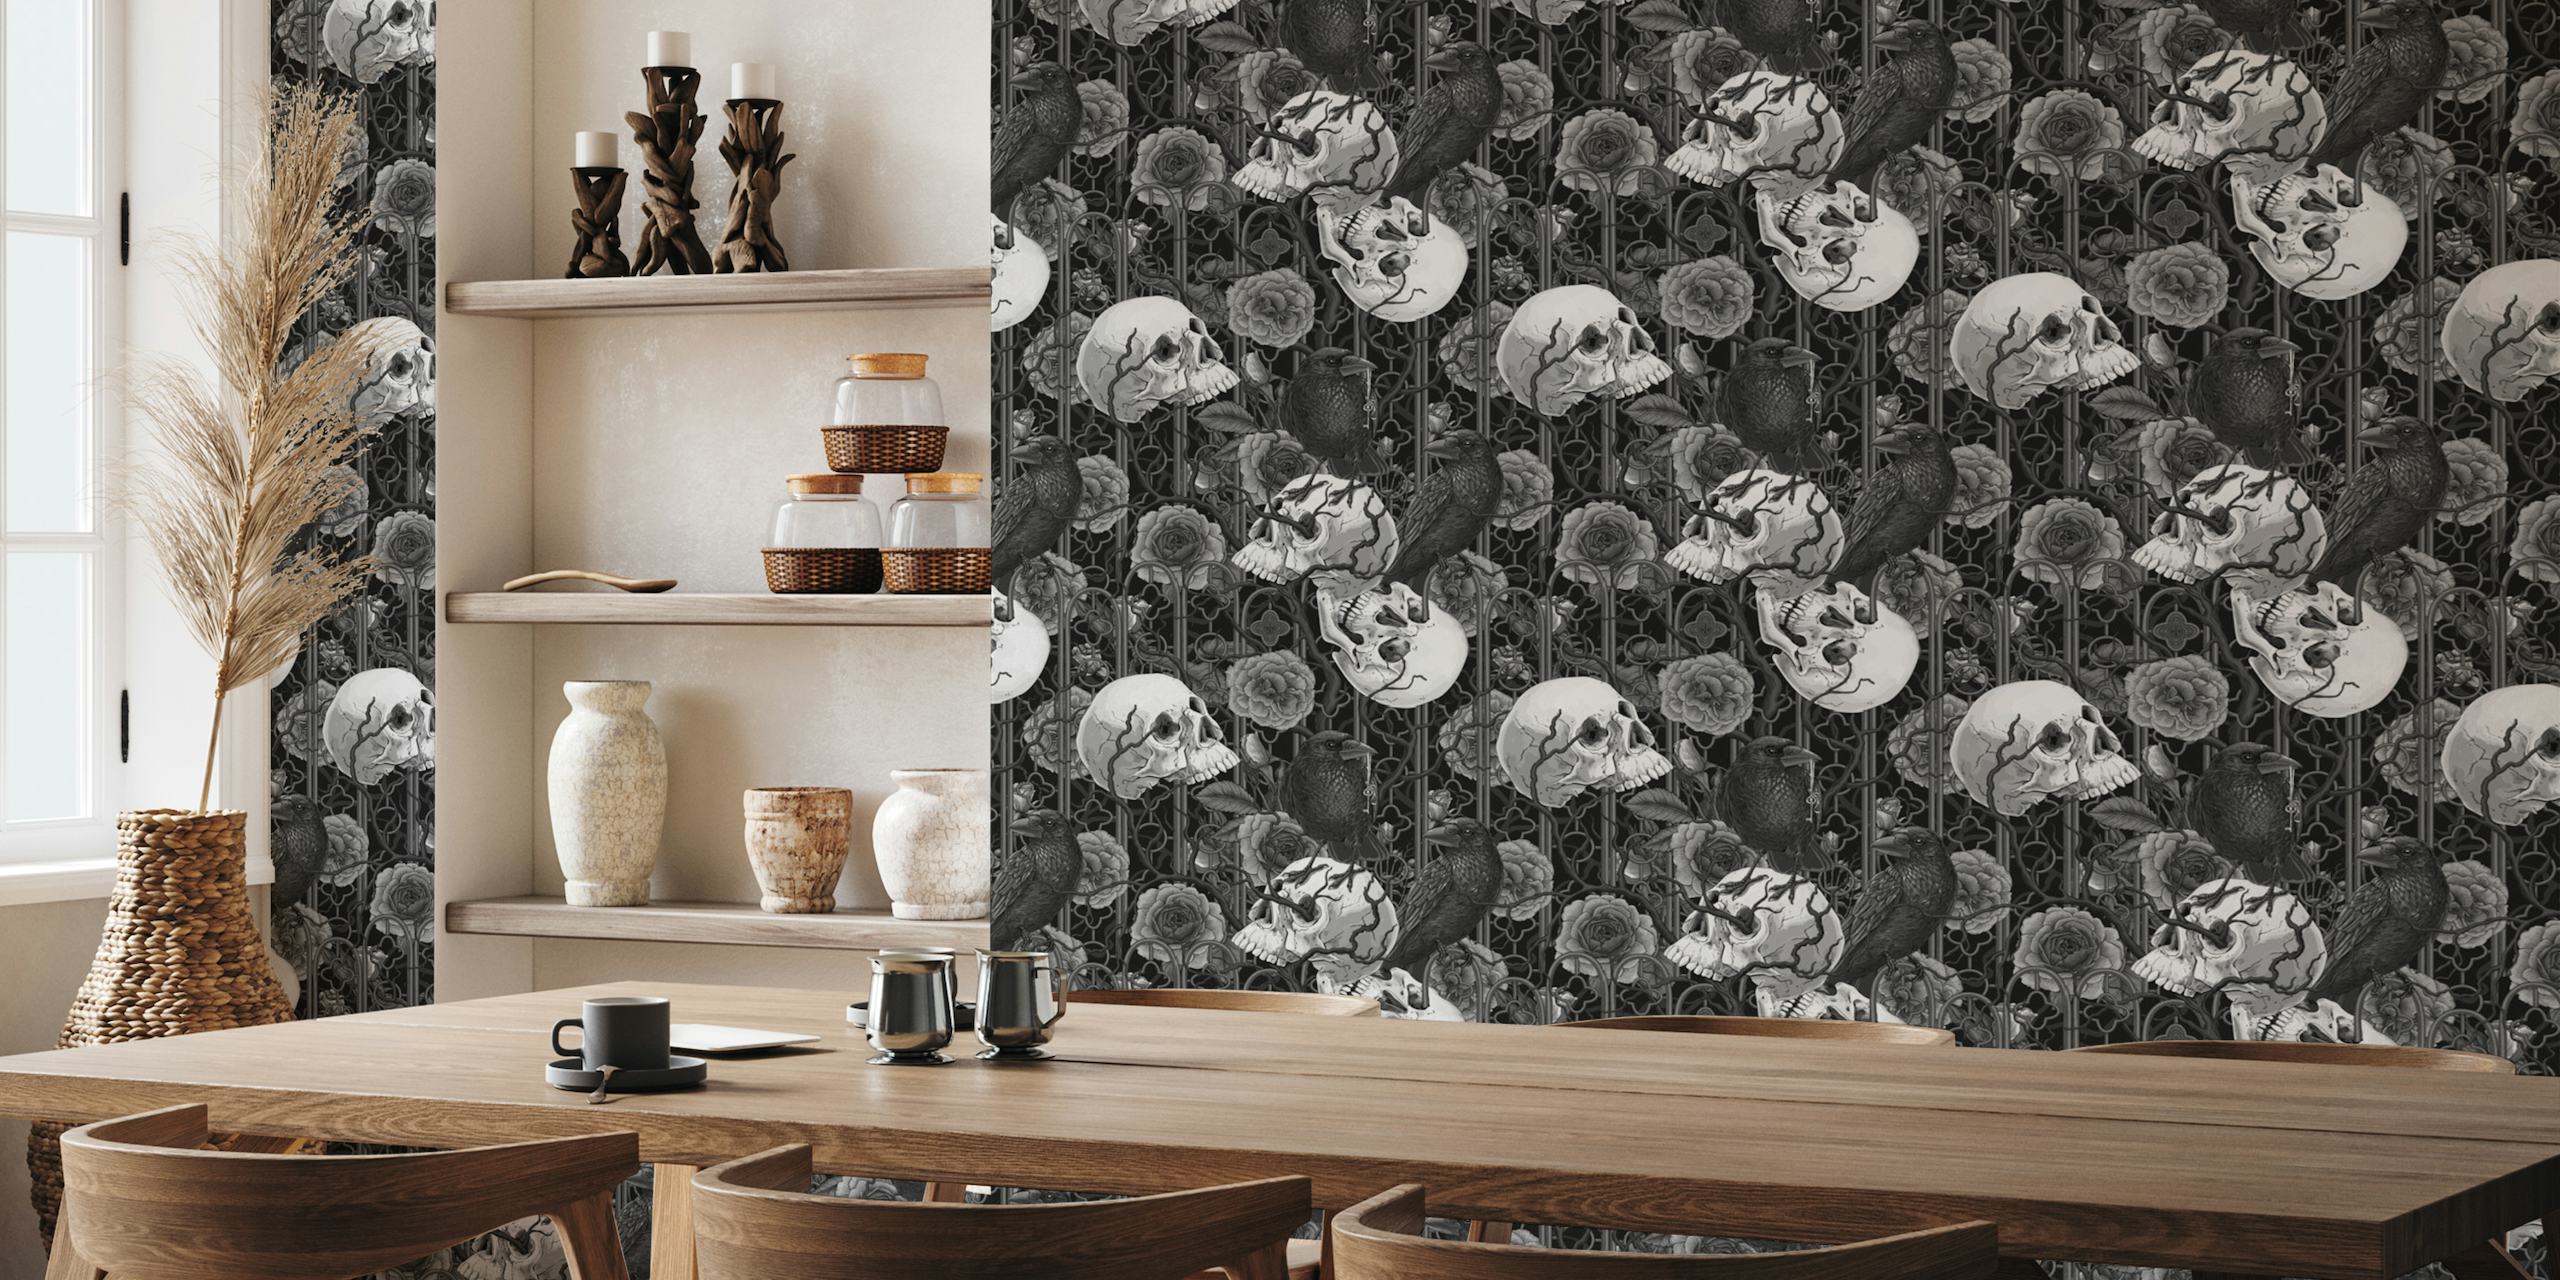 Raven's secret. Dark and moody gothic illustration with human skulls and roses wallpaper